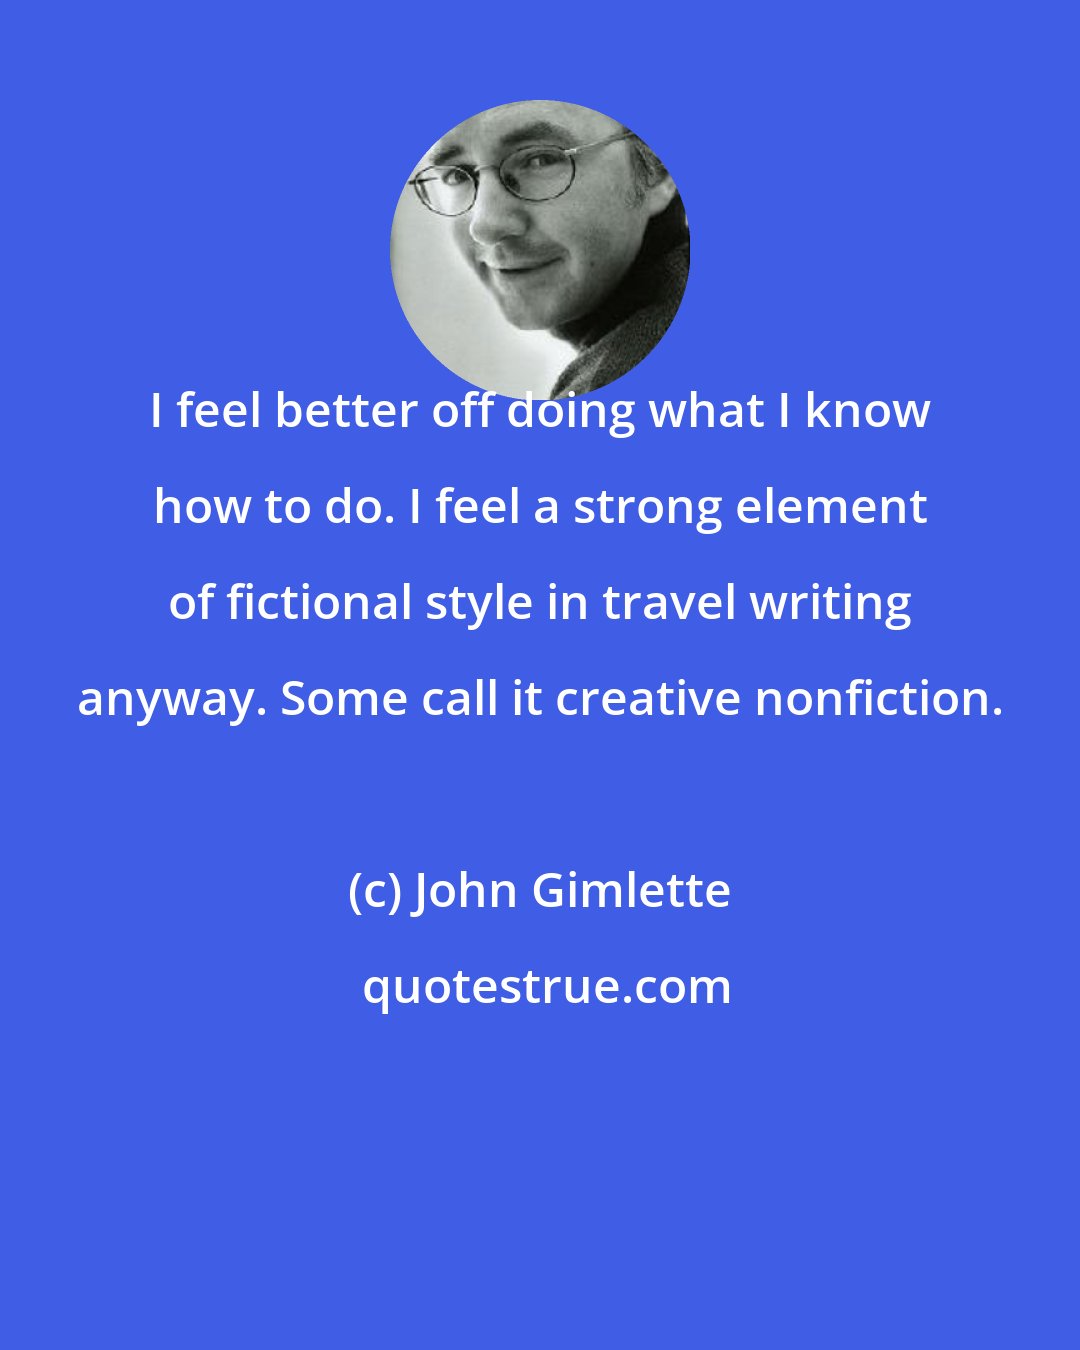 John Gimlette: I feel better off doing what I know how to do. I feel a strong element of fictional style in travel writing anyway. Some call it creative nonfiction.